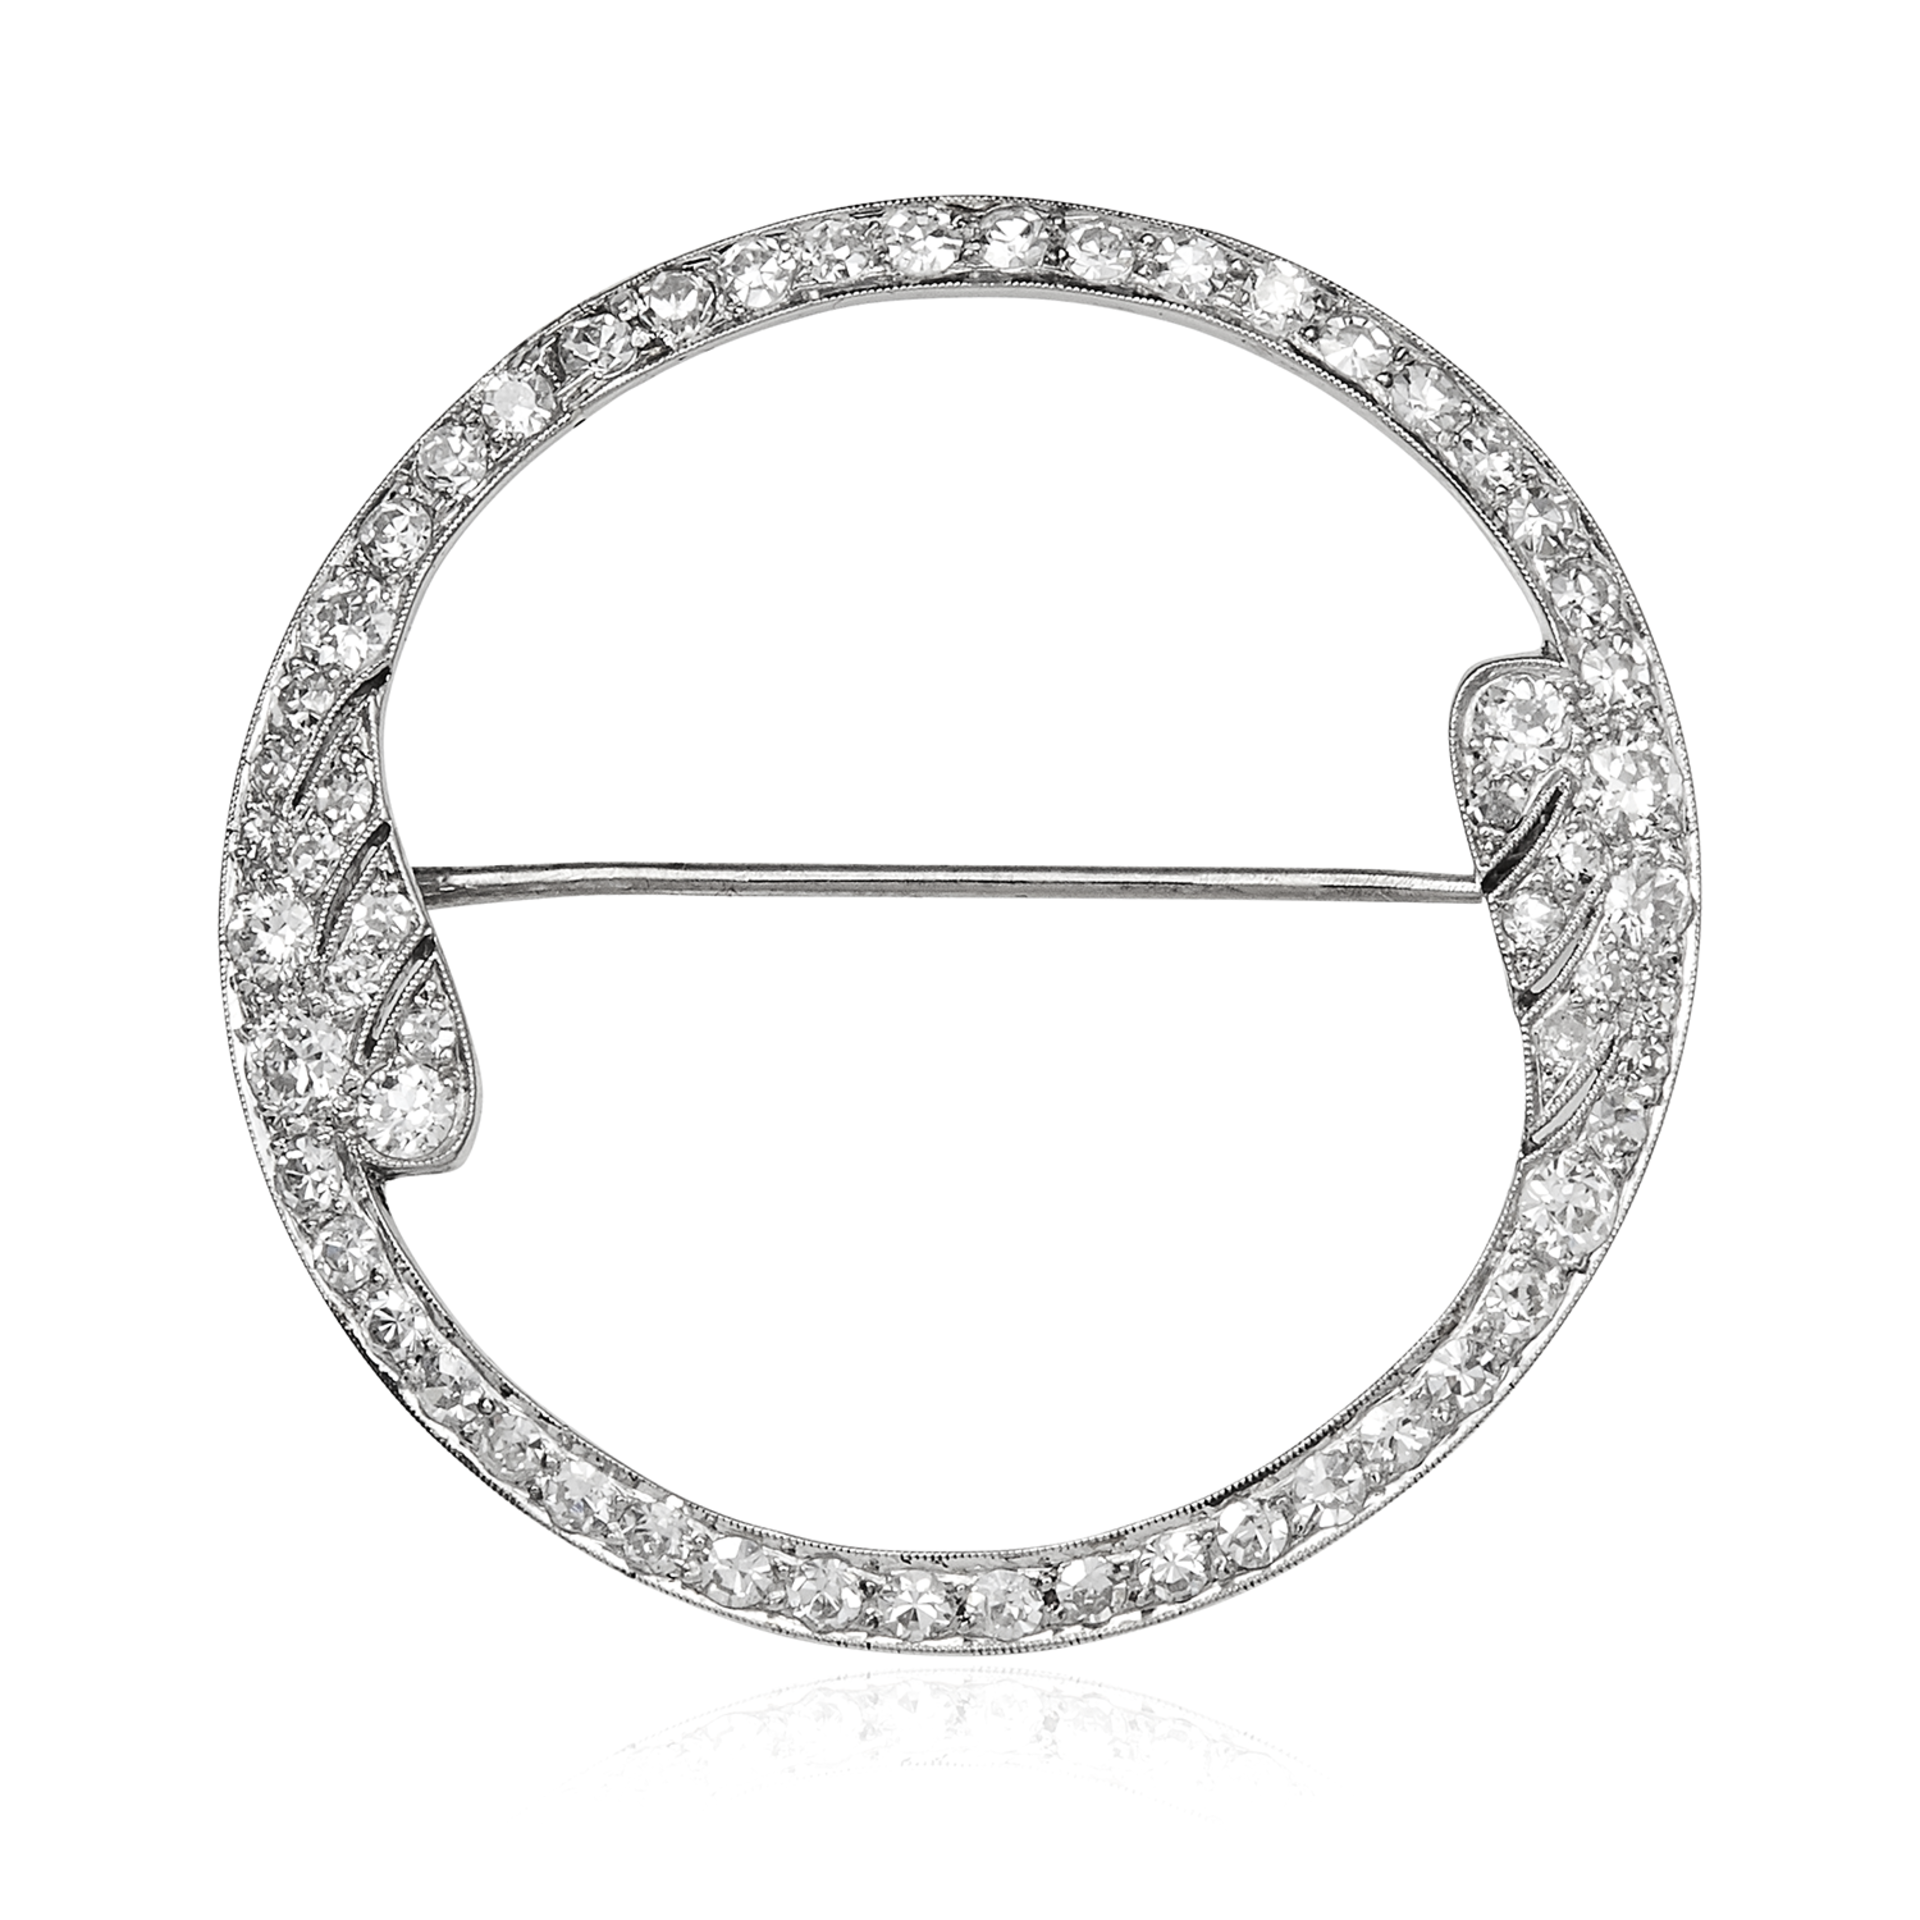 AN ANTIQUE DIAMOND BROOCH, LACHLOCHE CIRCA 1930 in platinum or white gold, of stylised circular